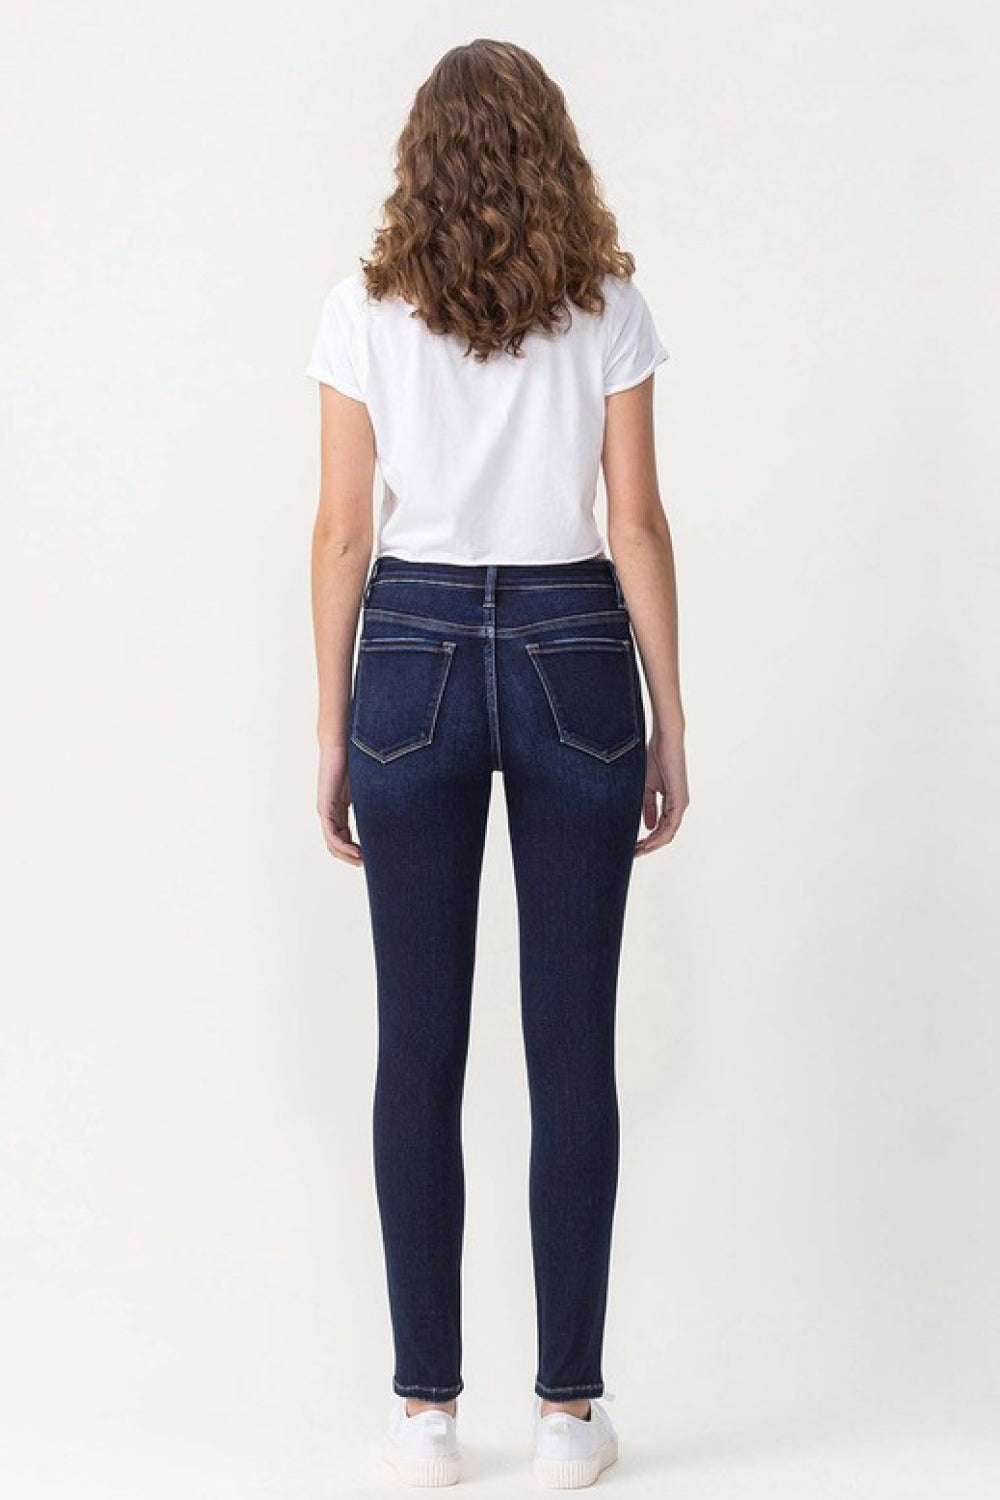 Vervet by Flying Monkey Sequoia Full Size Midrise Ankle Skinny Jeans - Cheeky Chic Boutique